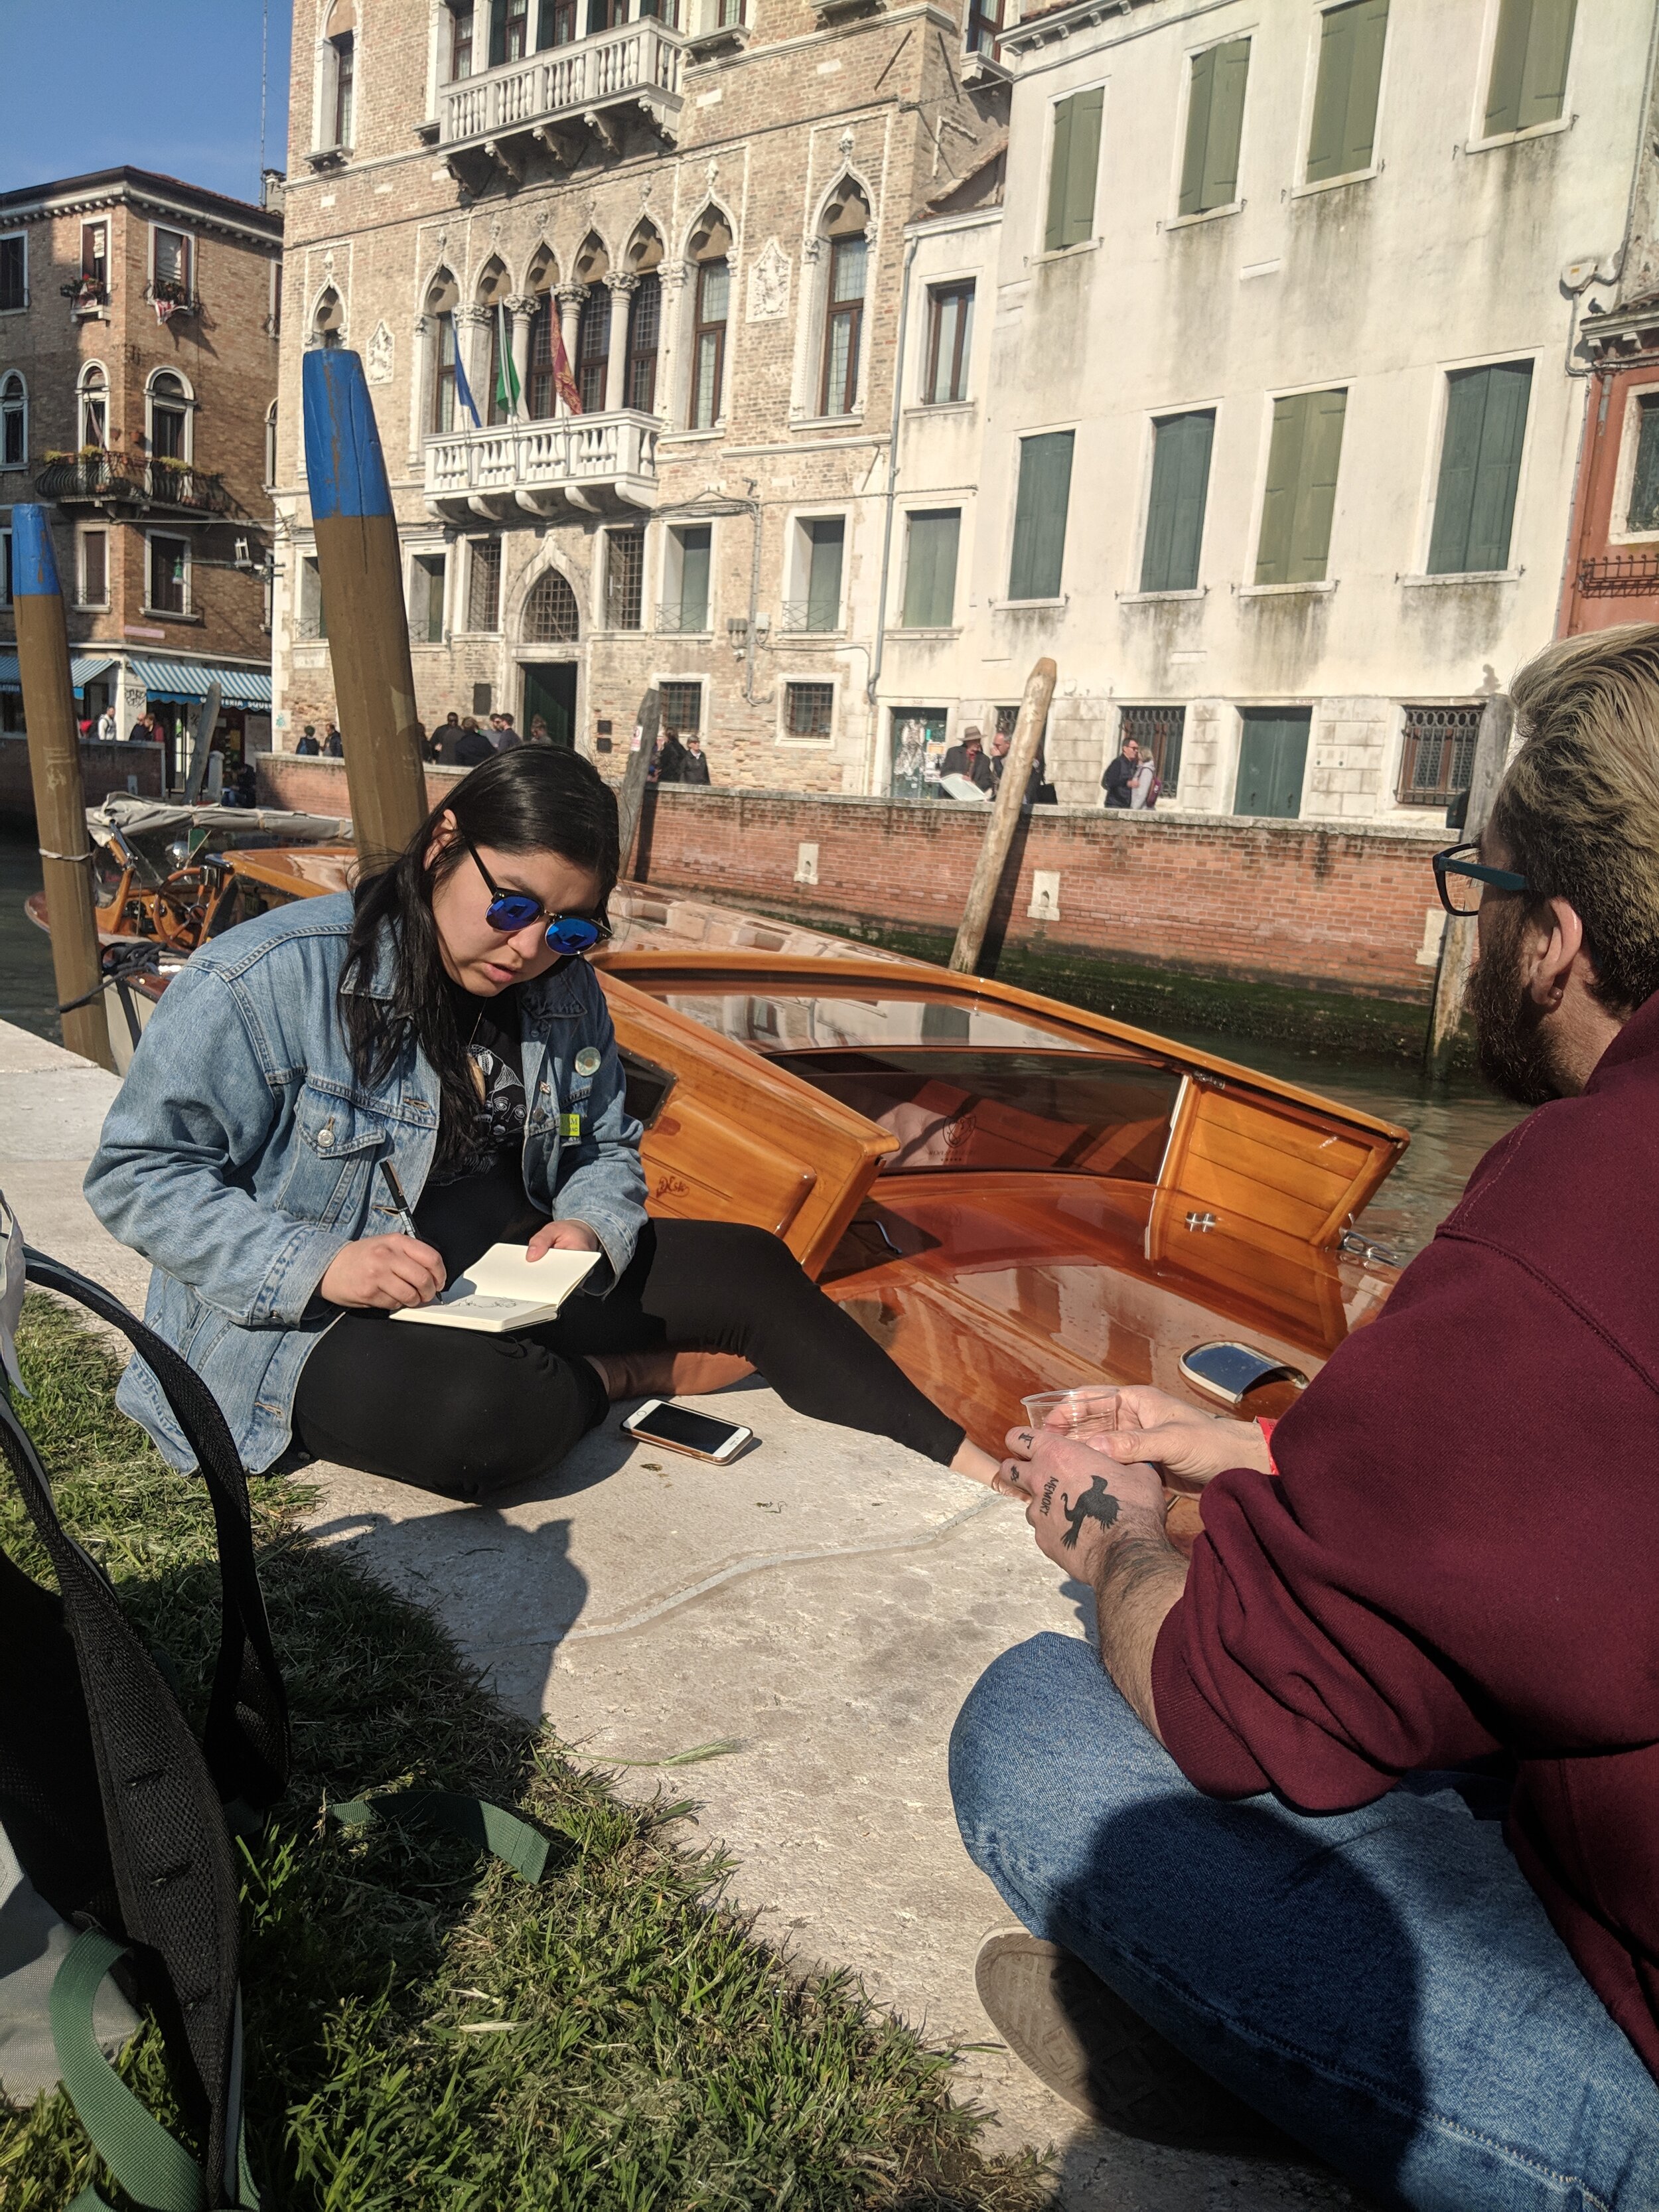  Darcie Bernhardt and Jason Sikoak sketching by the canal in Venice, May 2019. Photo by Amanda Shore. 